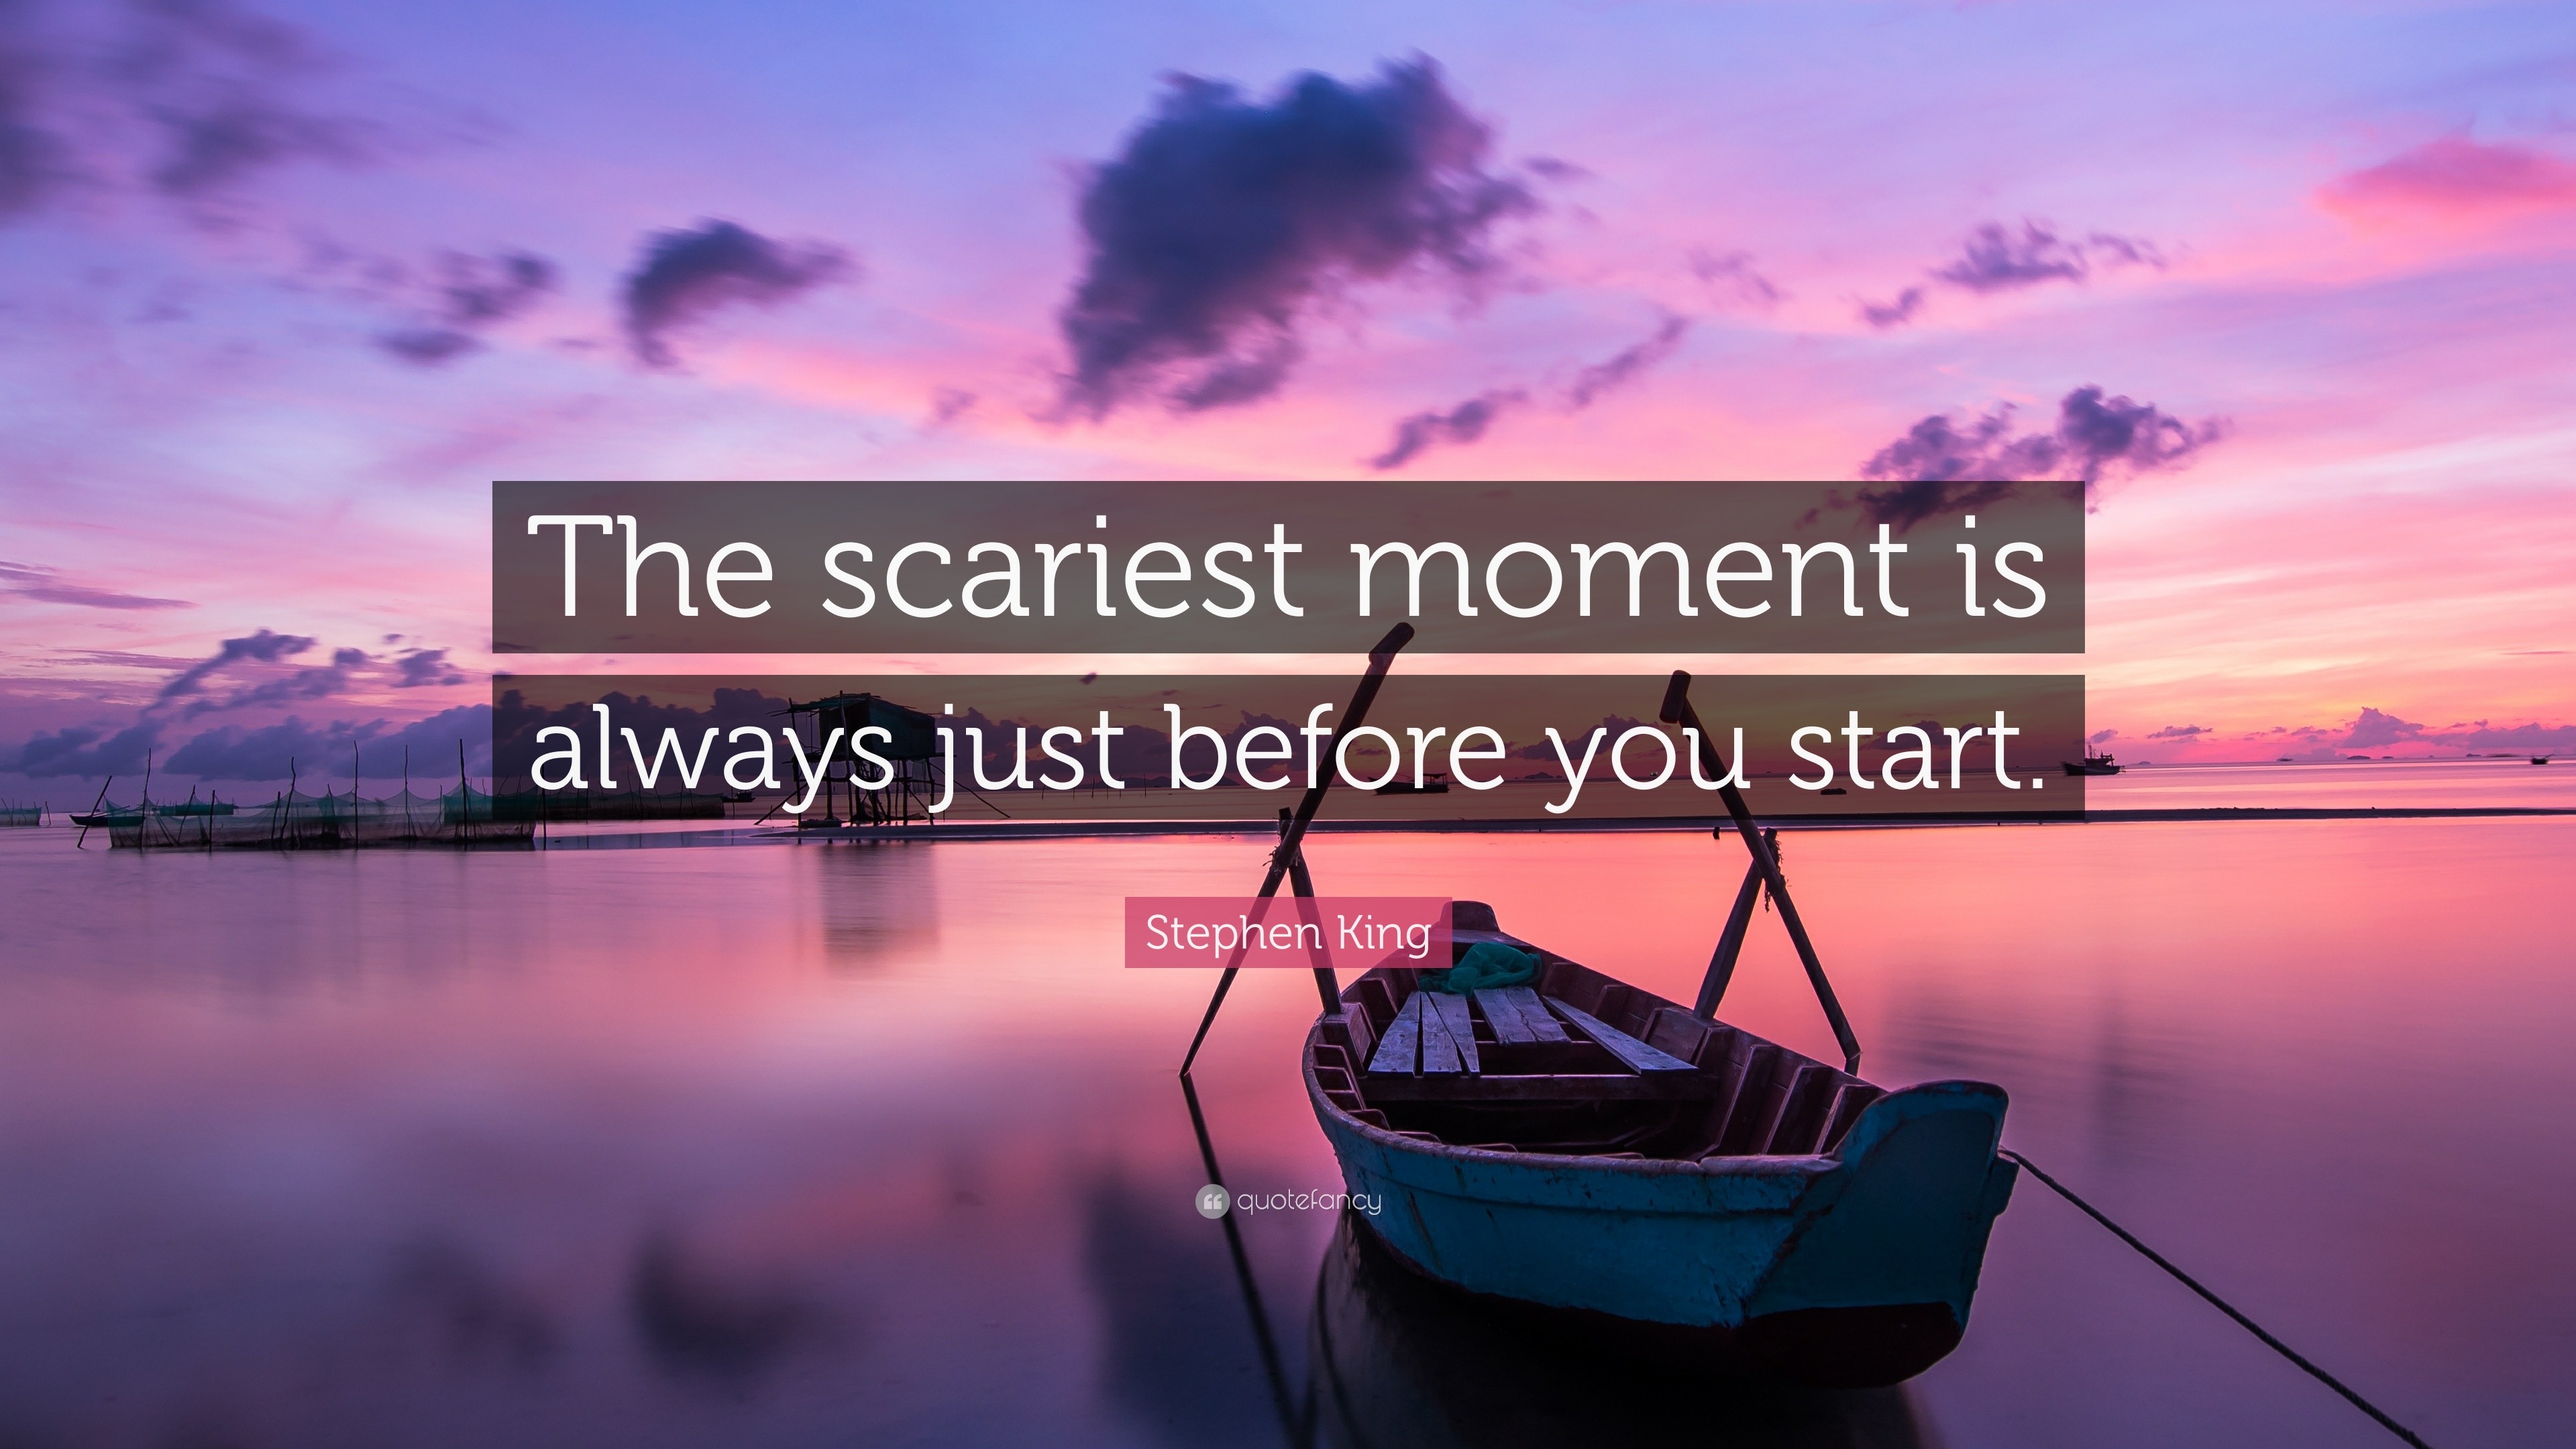 Stephen King Quote: “The scariest moment is always just before you start.”